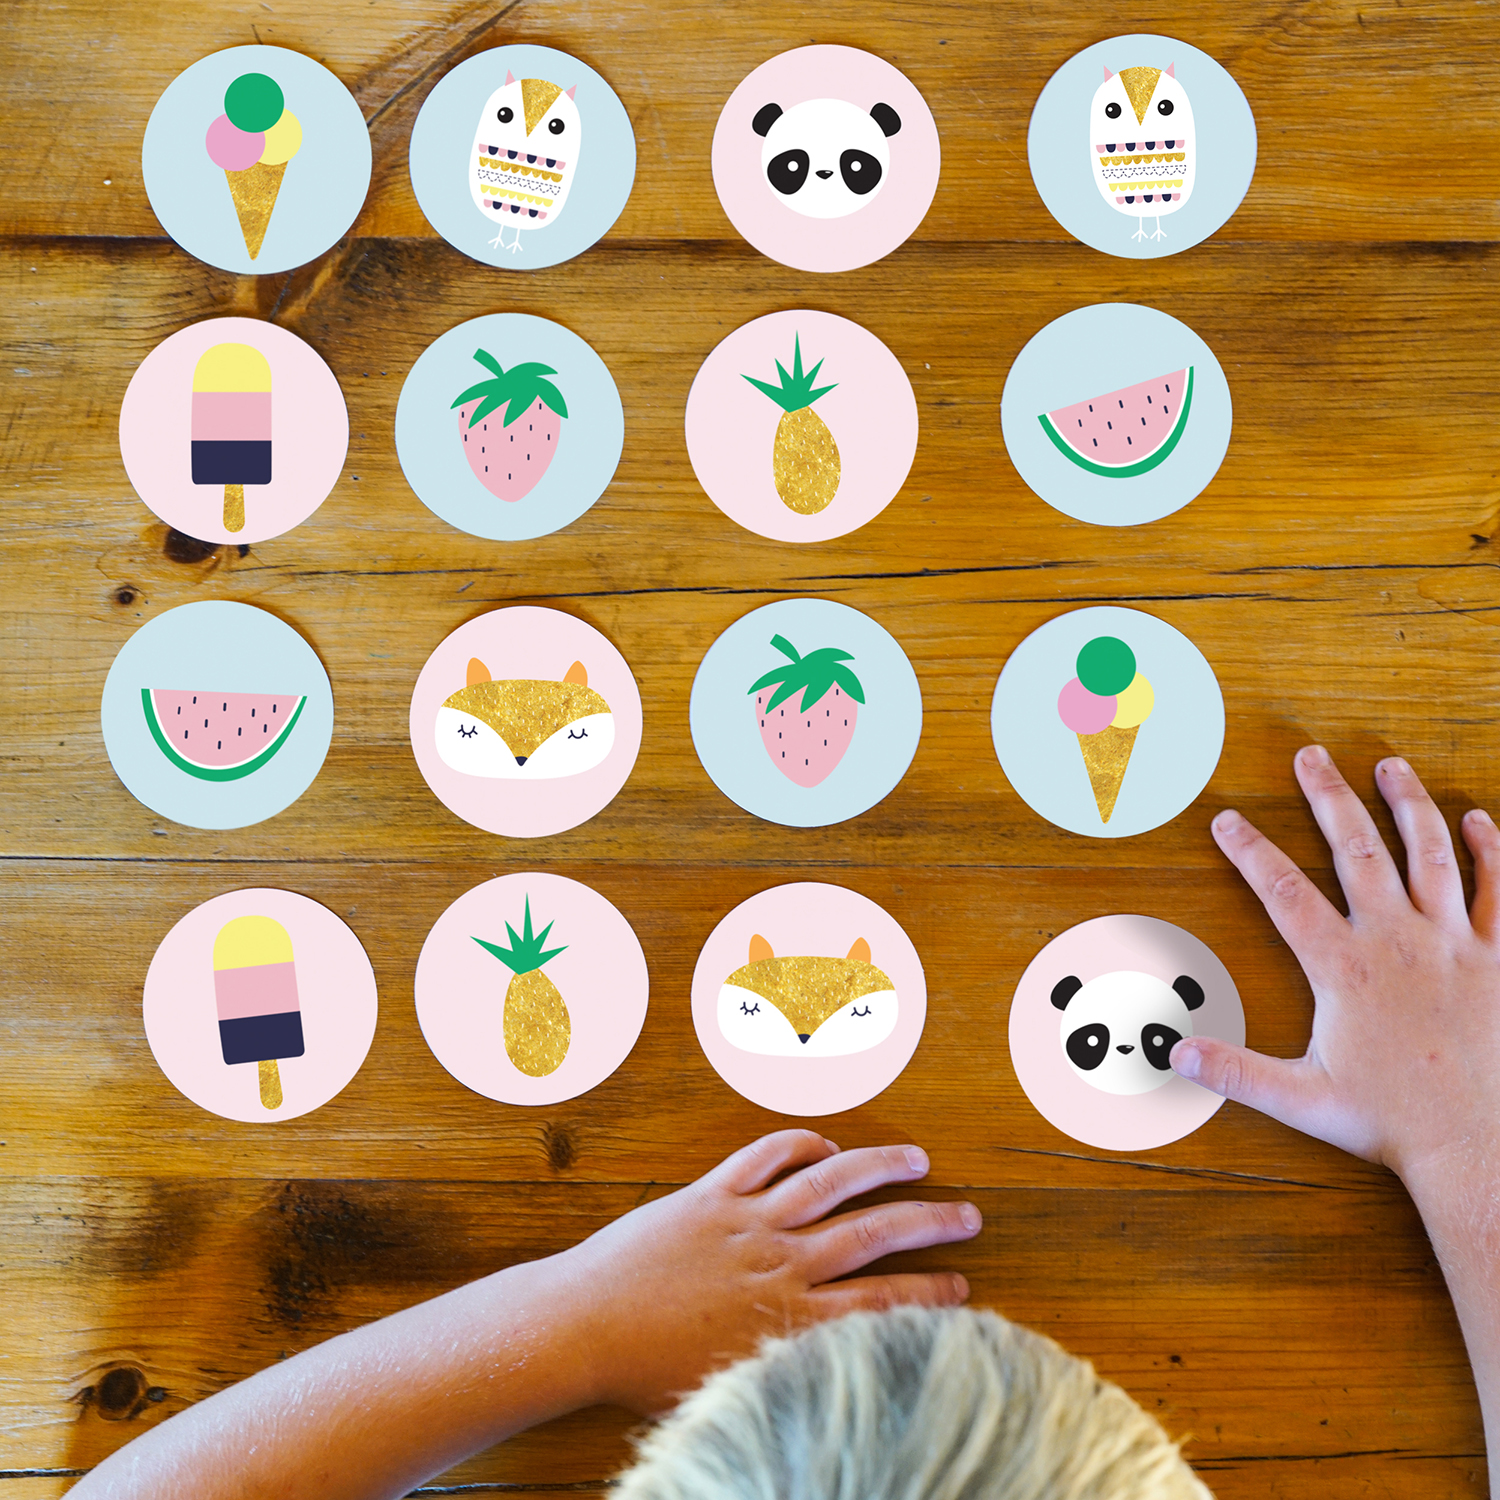 Awesome FREE Memory Game Activity for Kids - Sunshine Parties